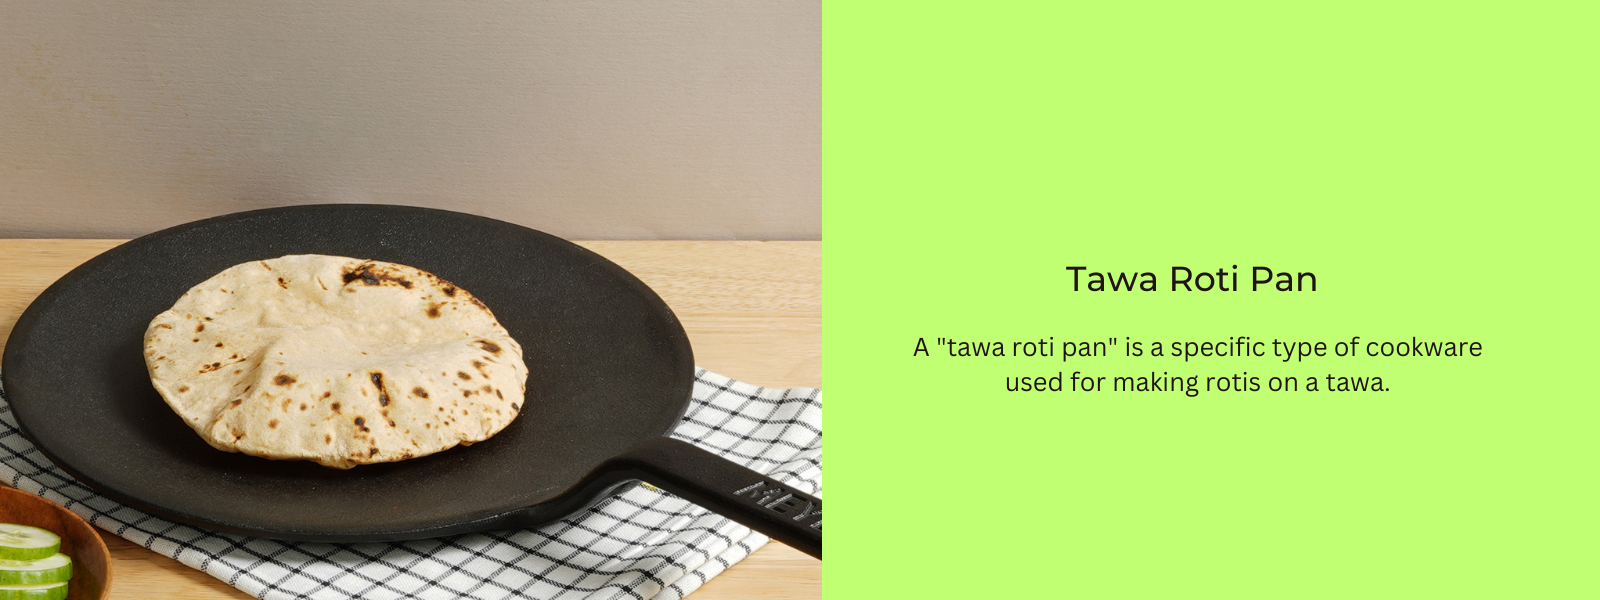 Tawa Roti Pan - The Most Important Cookware In An Indian Kitchen